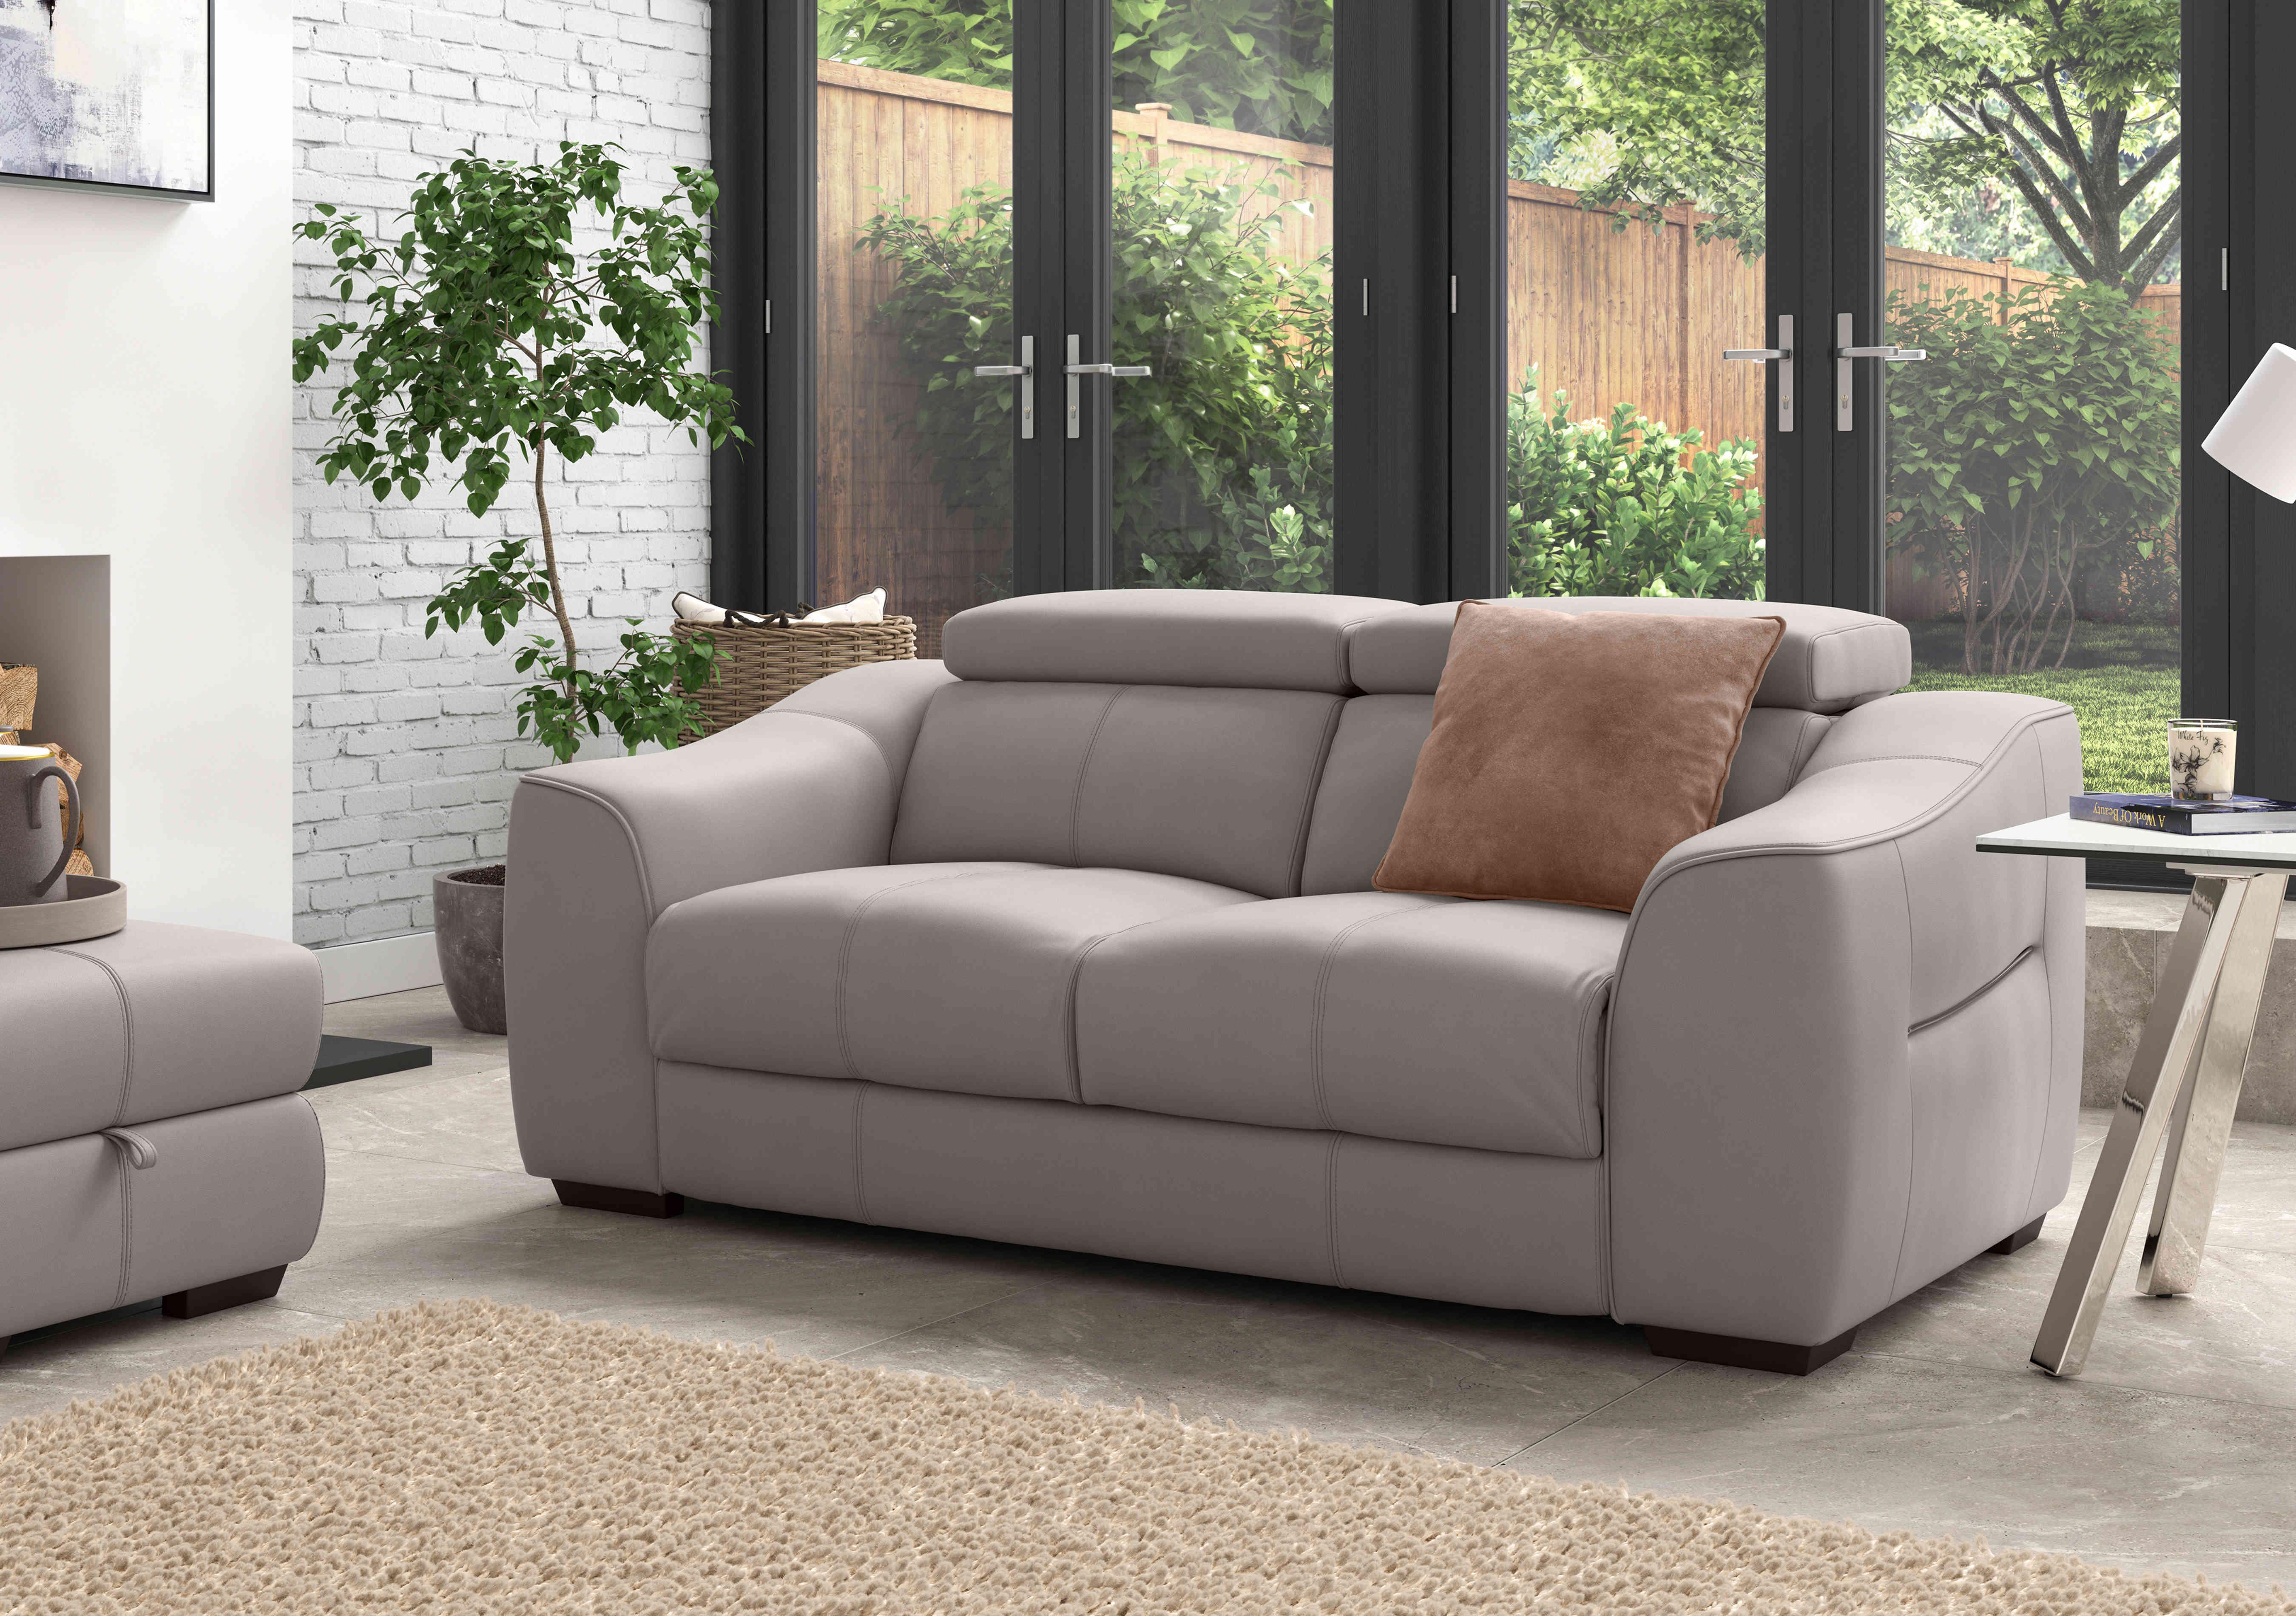 Elixir 2 Seater Leather Sofa in  on Furniture Village